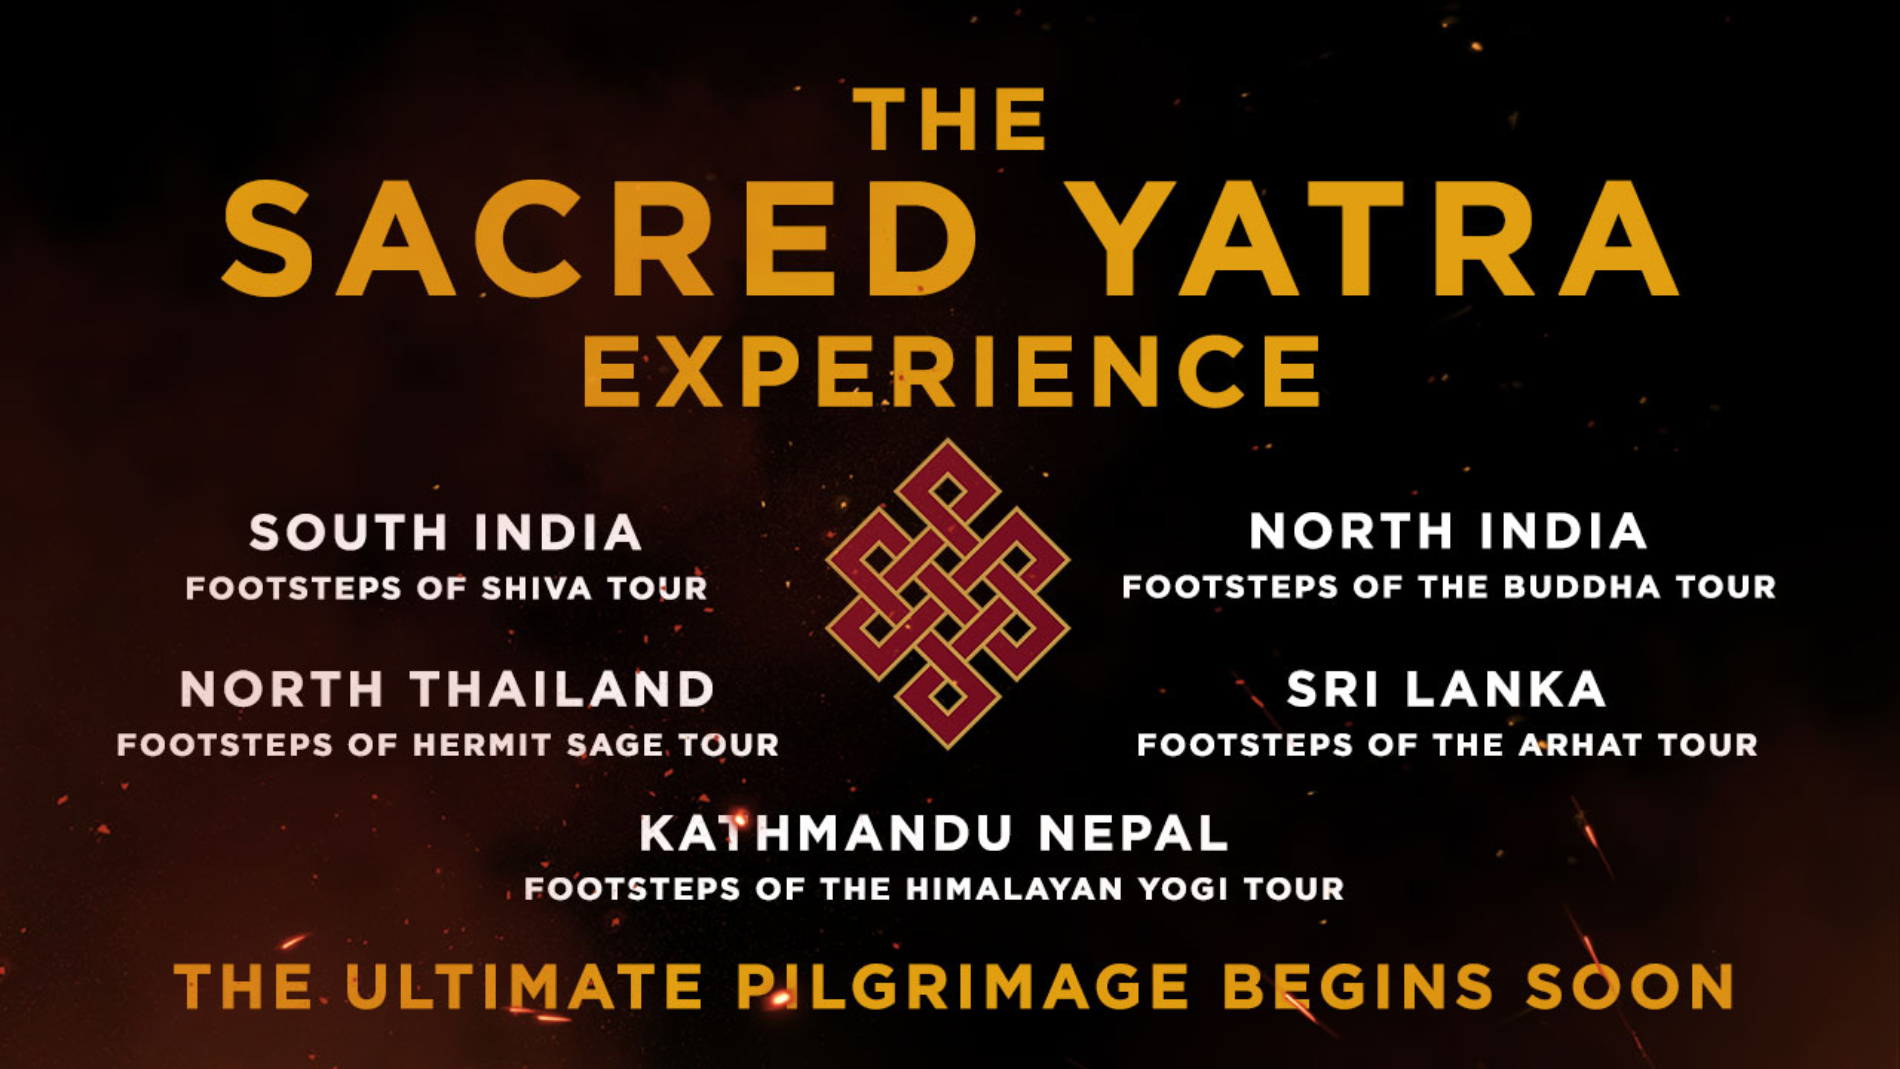 The-Sacred-Yatra-Tour-Thumhnail-Complete